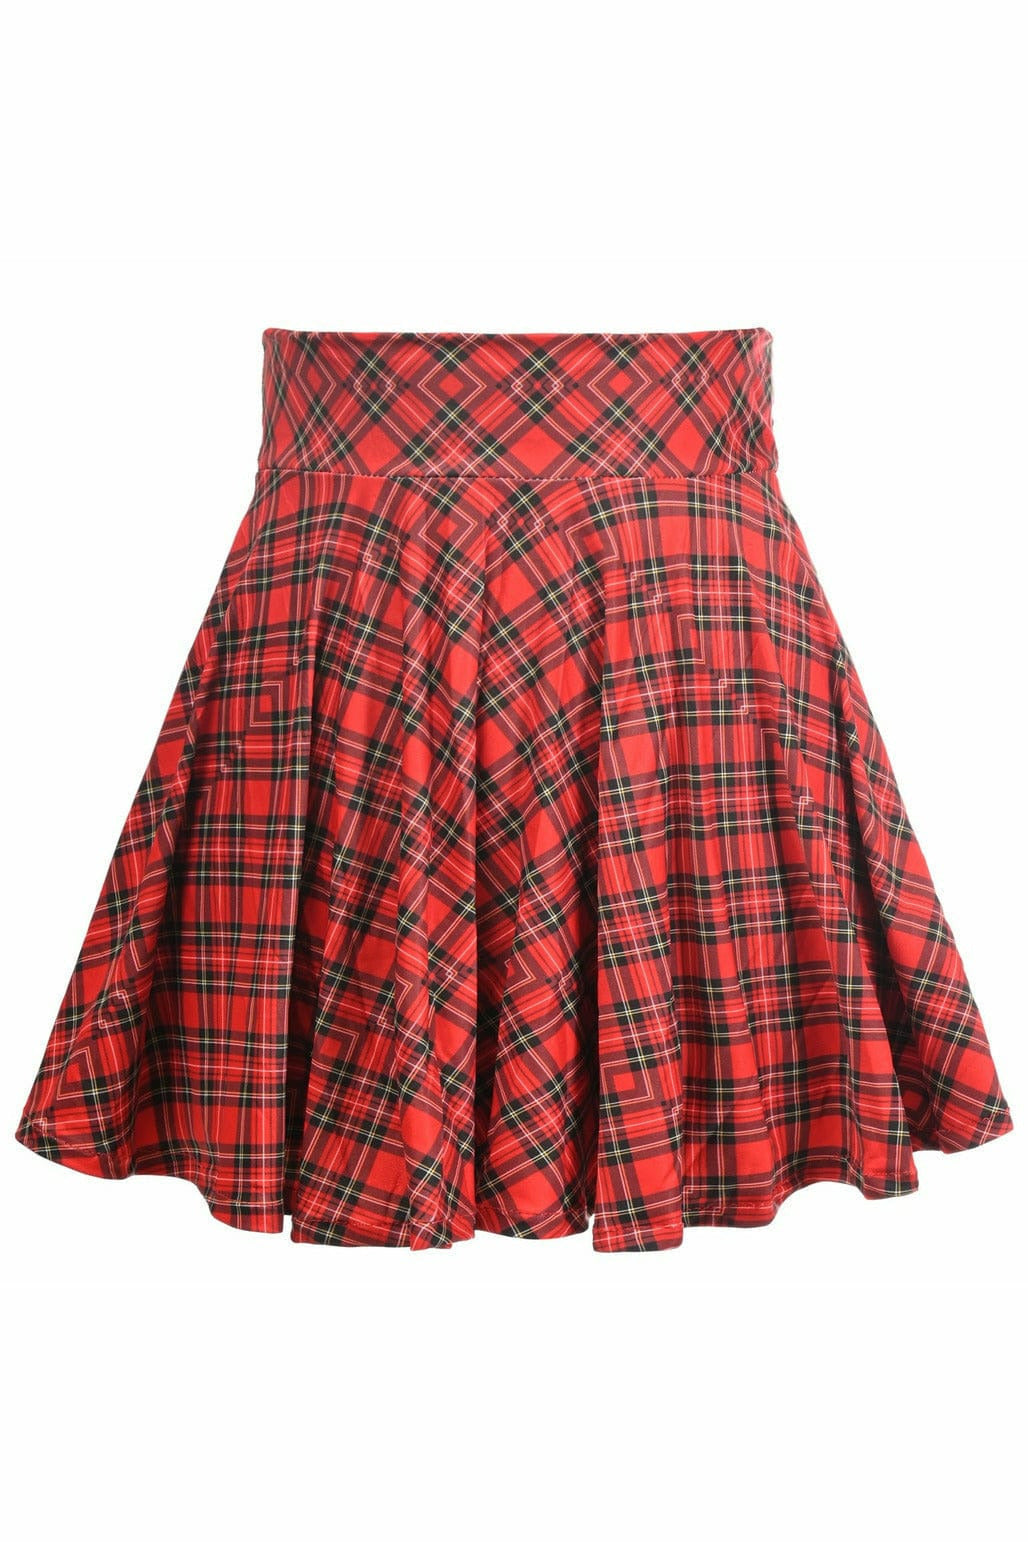 Daisy Corsets Red Plaid Stretch Lycra Skirt